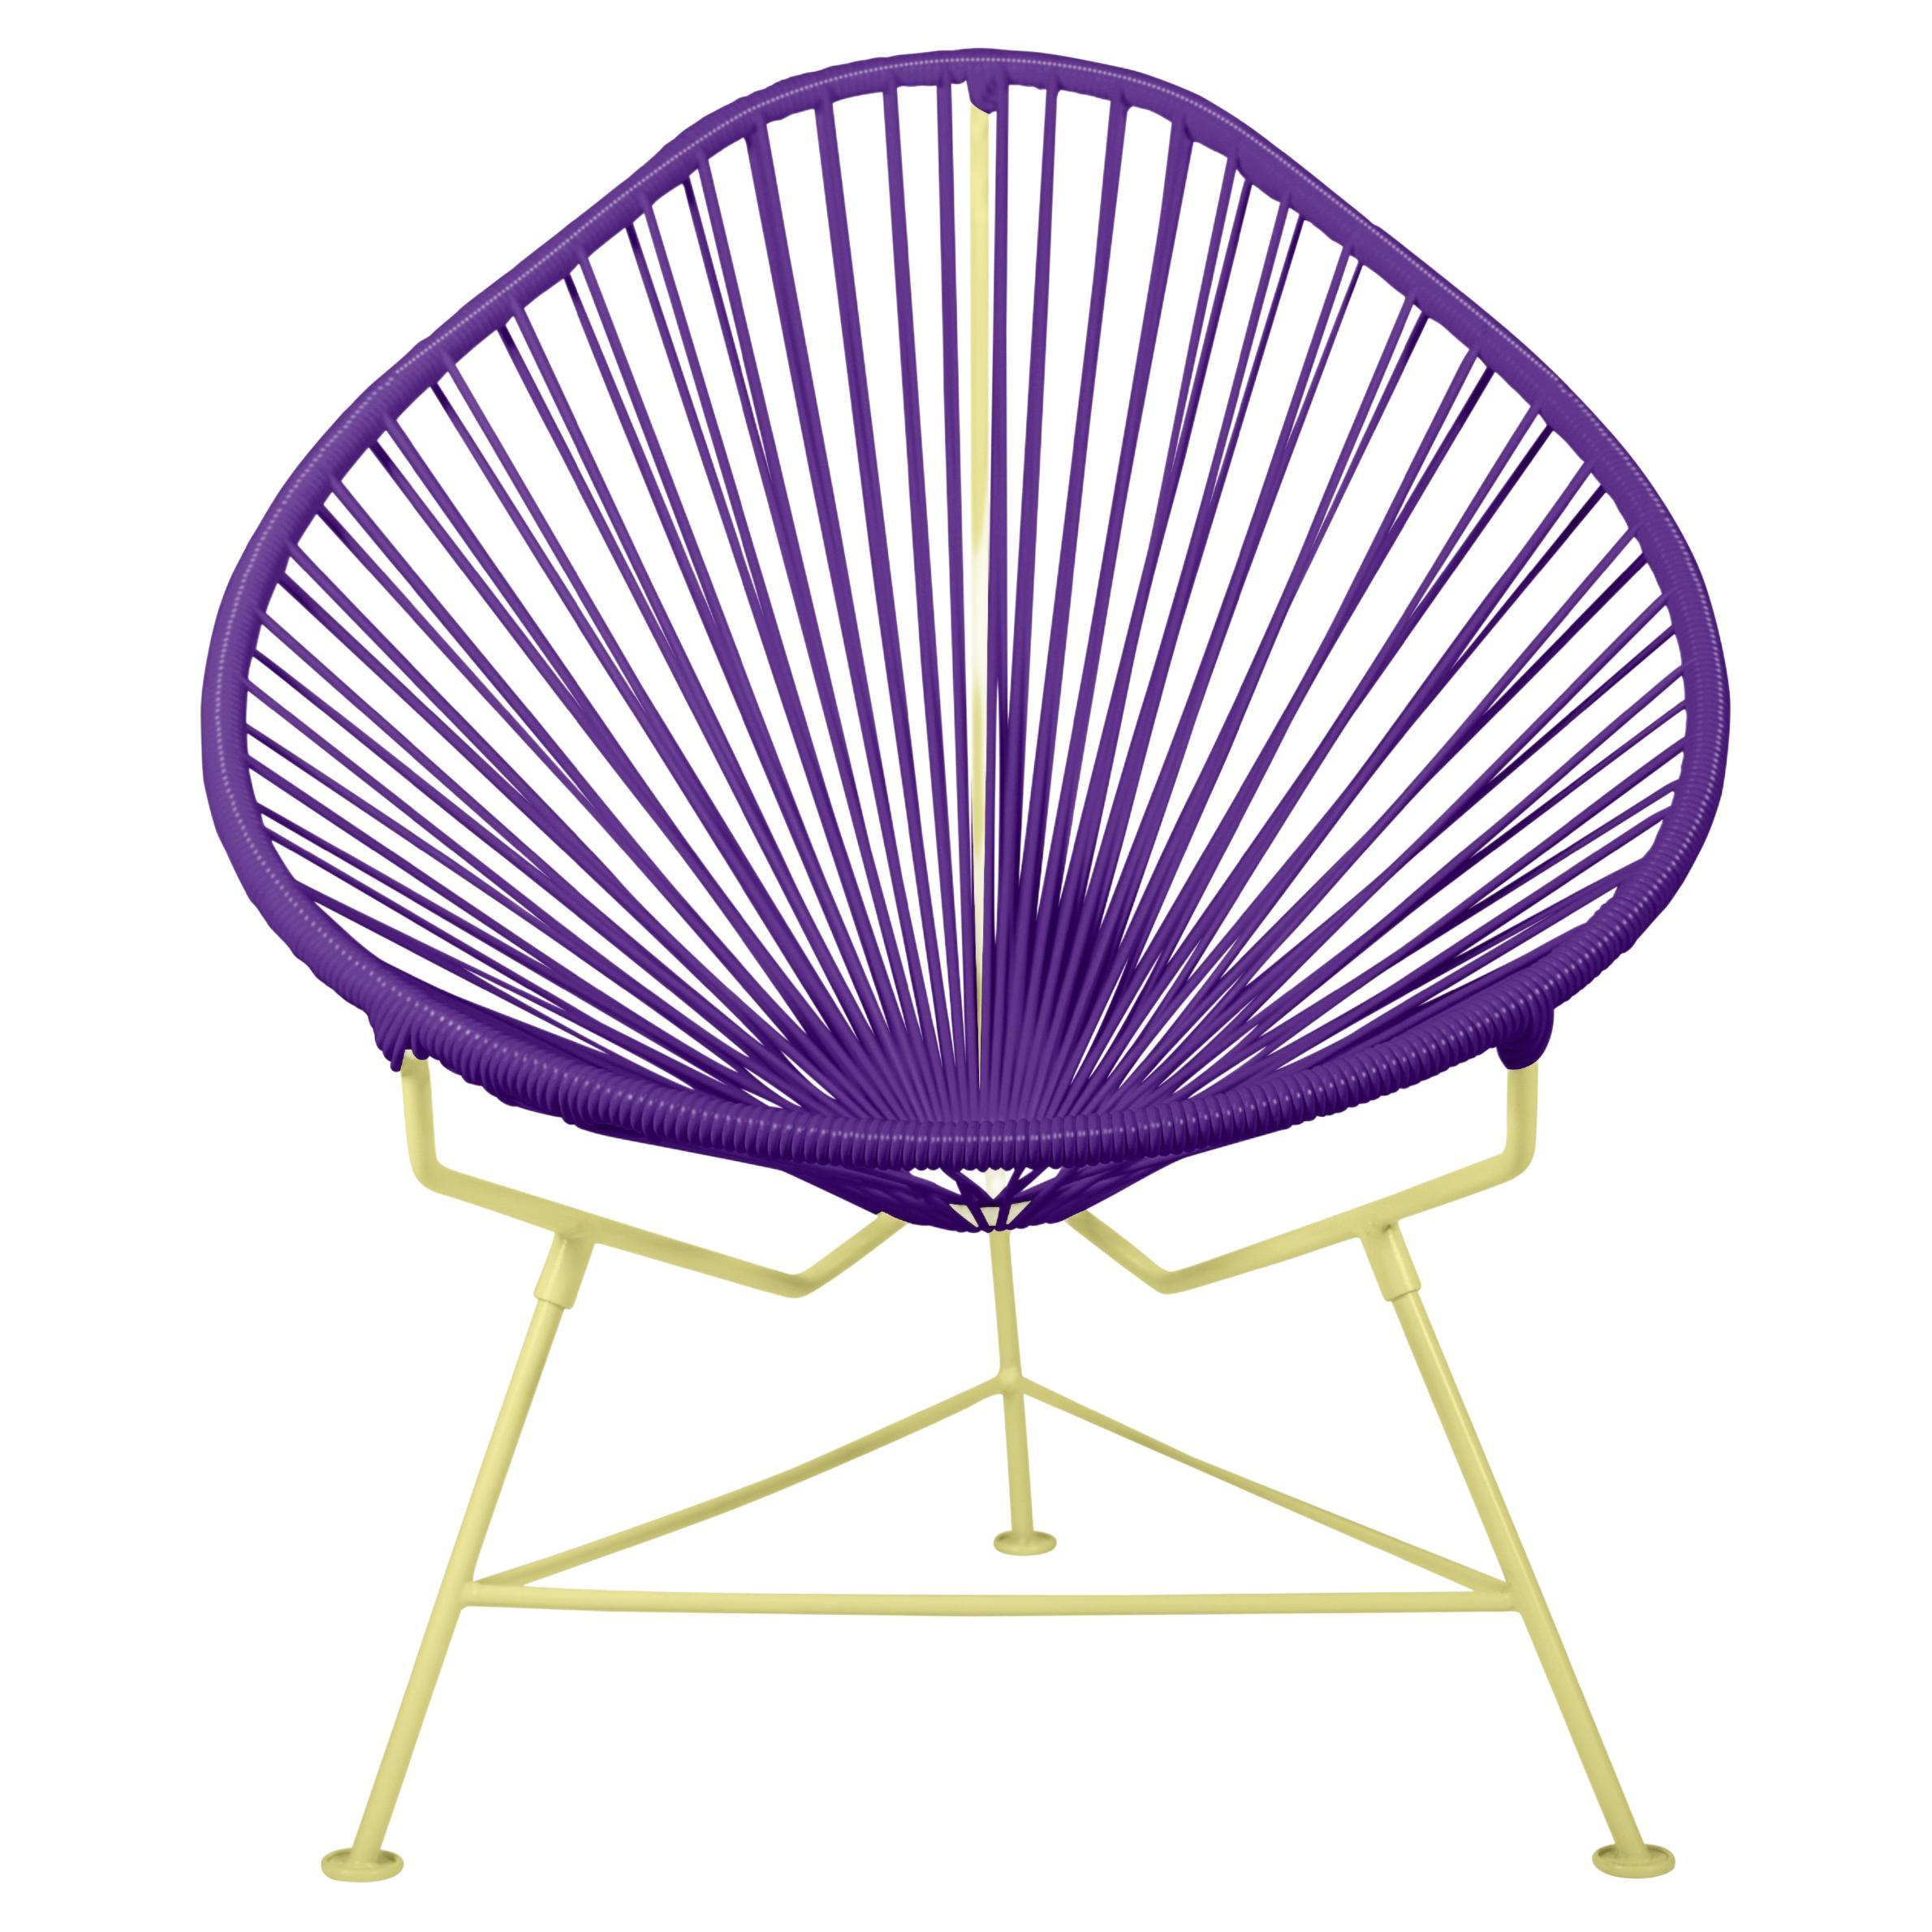 Innit Designs Acapulco Chair Purple Weave on Yellow Frame